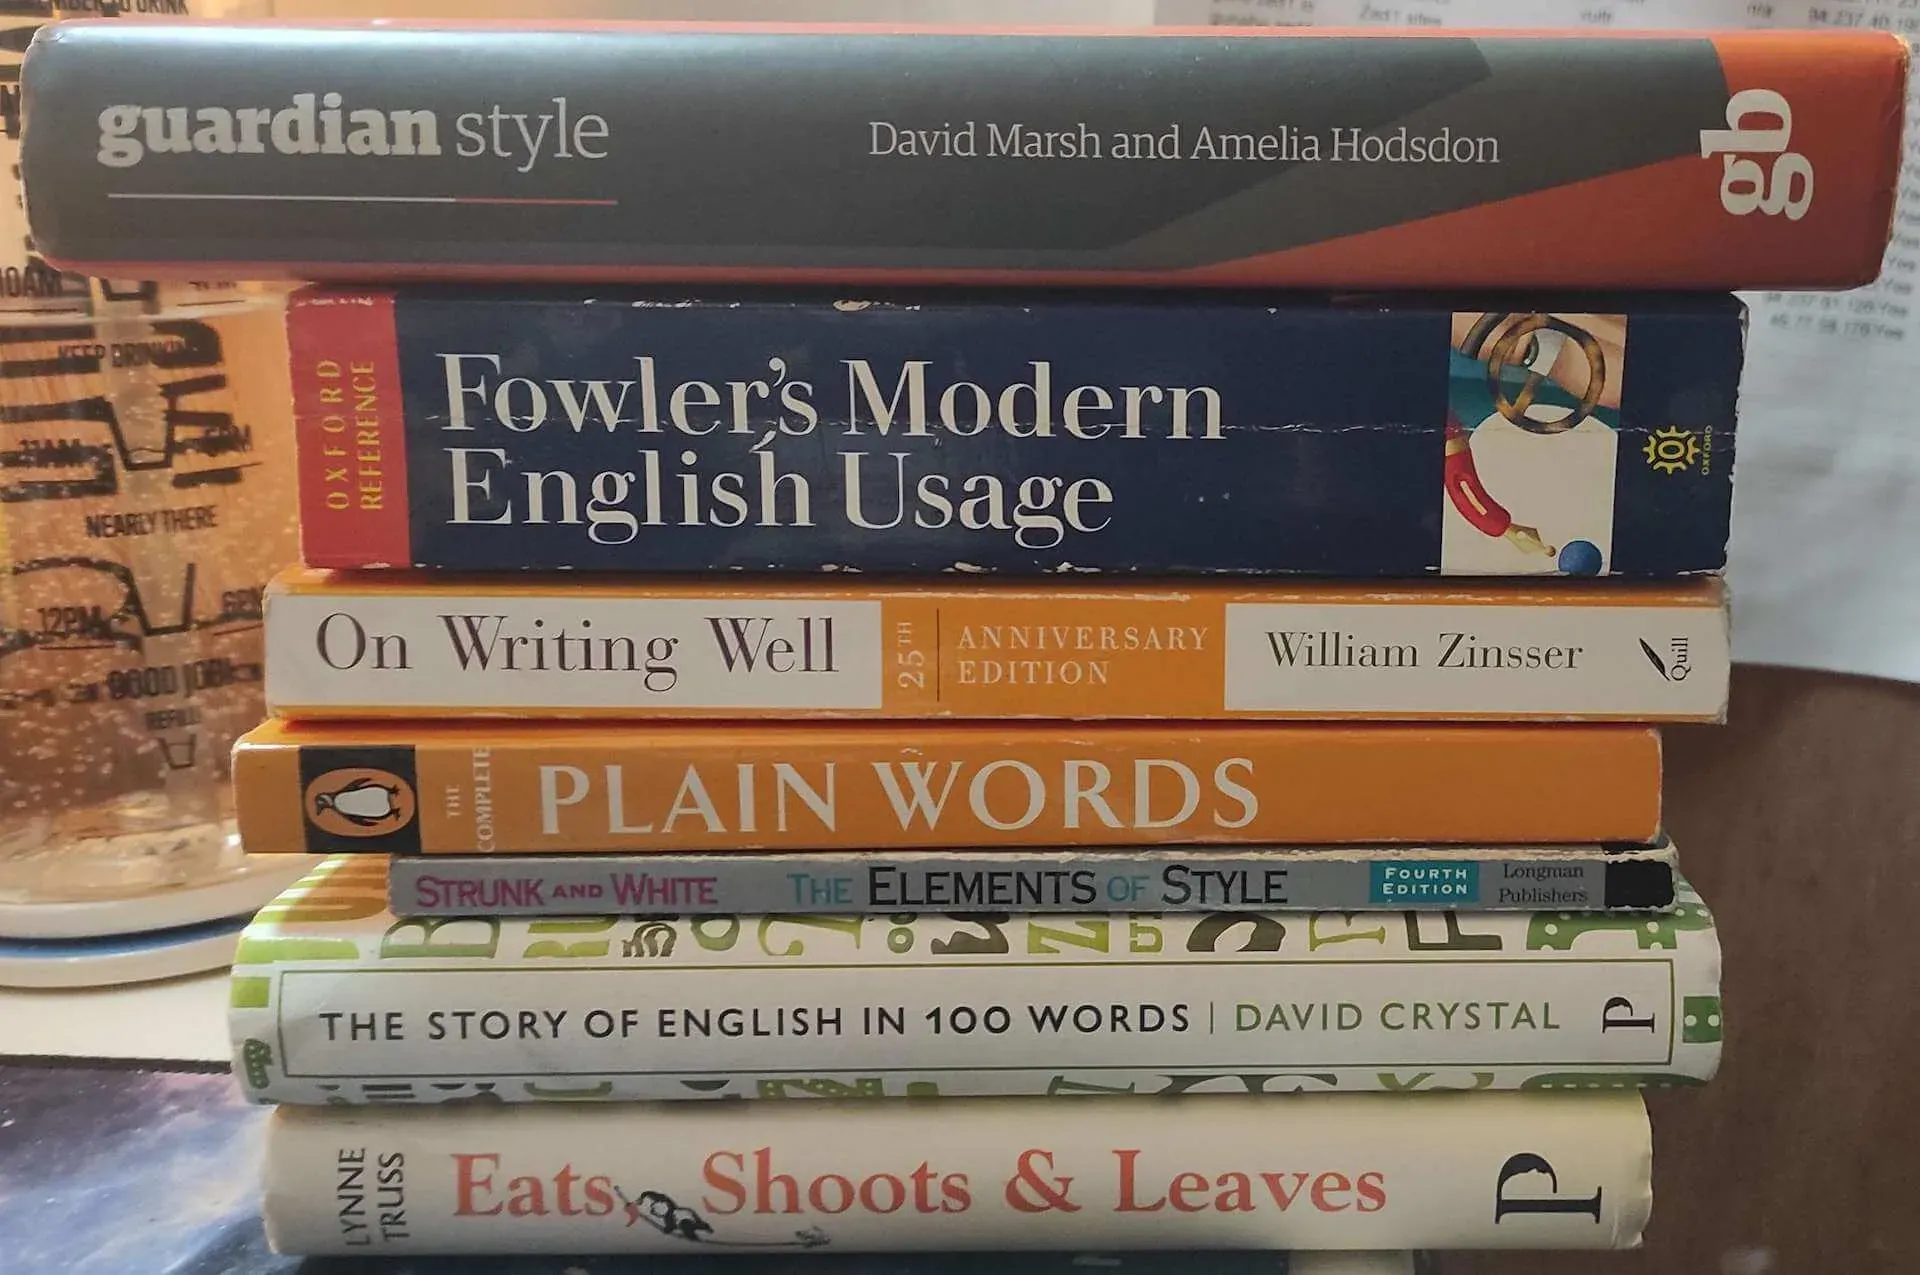 Stack of books including Guardian Style by David Marsh and Amelia Hodson, Fowler's Modern English Usage,  On Writing Well by William Zinsser, Penguin's The Complete Plain Words, The Elements of Style by Strunk and White, and The Story of English in 100 Words by David Crystal.